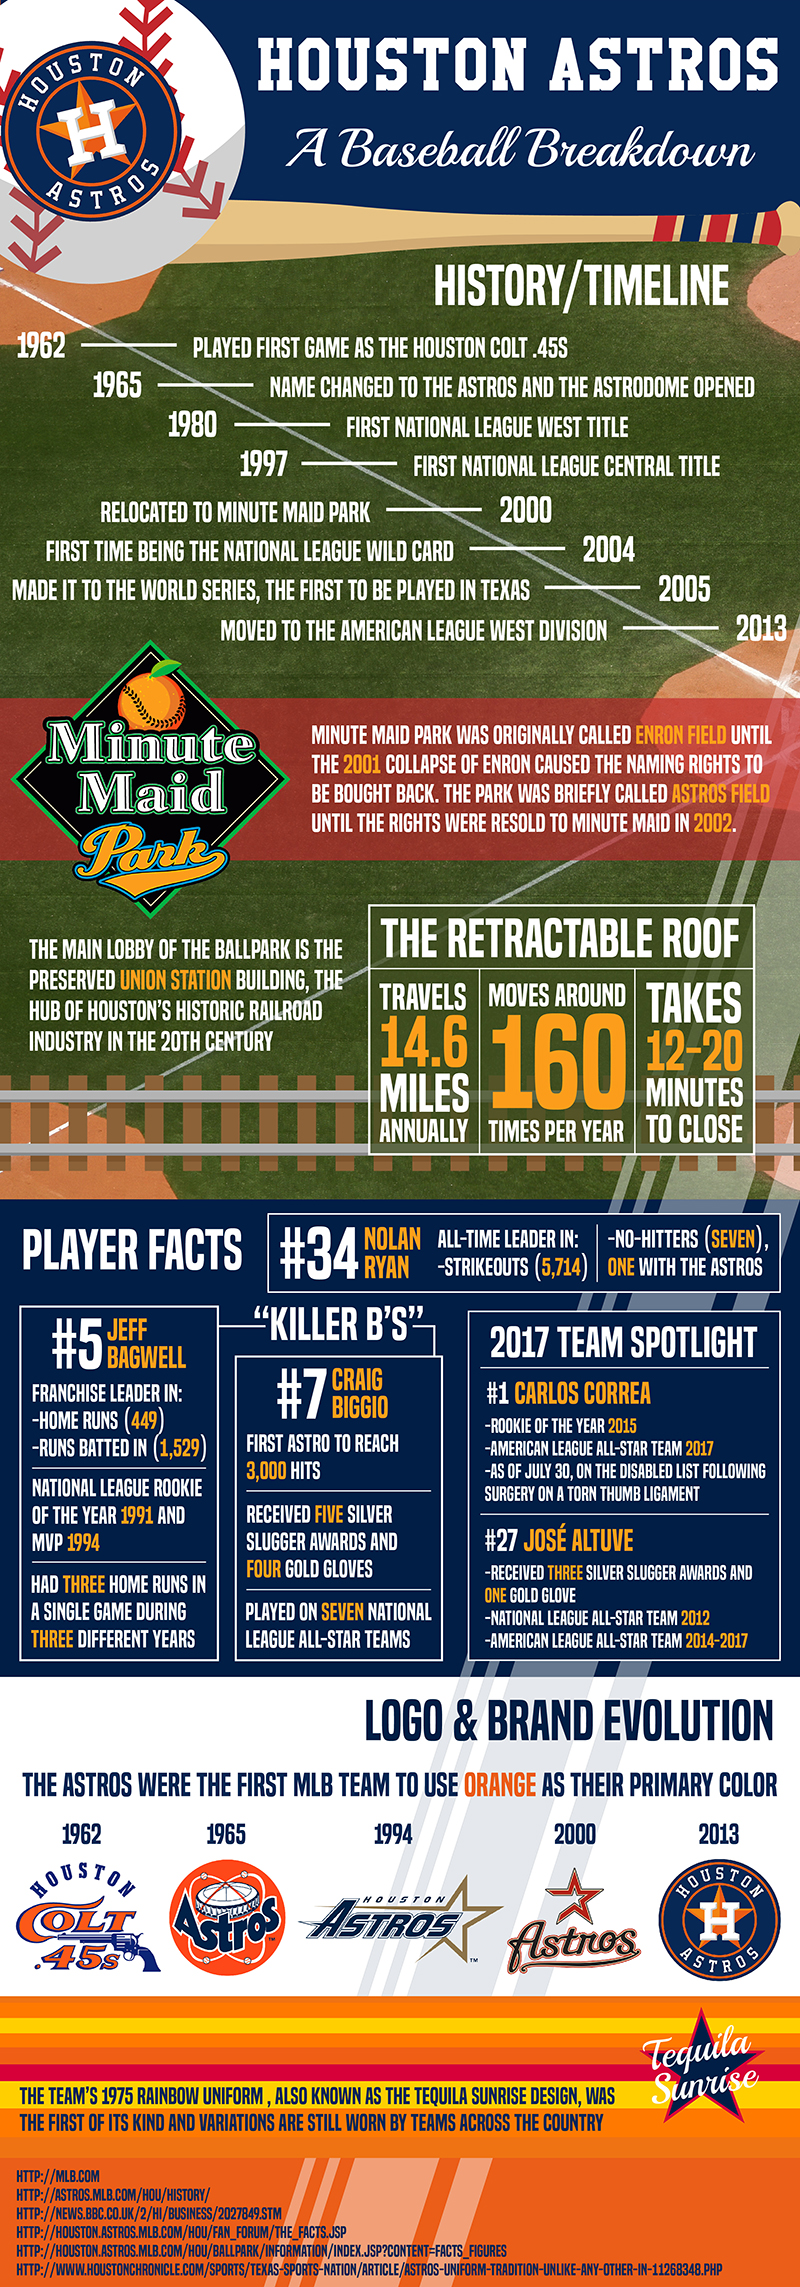 GRAPHIC: An infographic about the history of the Houston Astros, Graphic created by The Signal online editor, Krista Kamp.